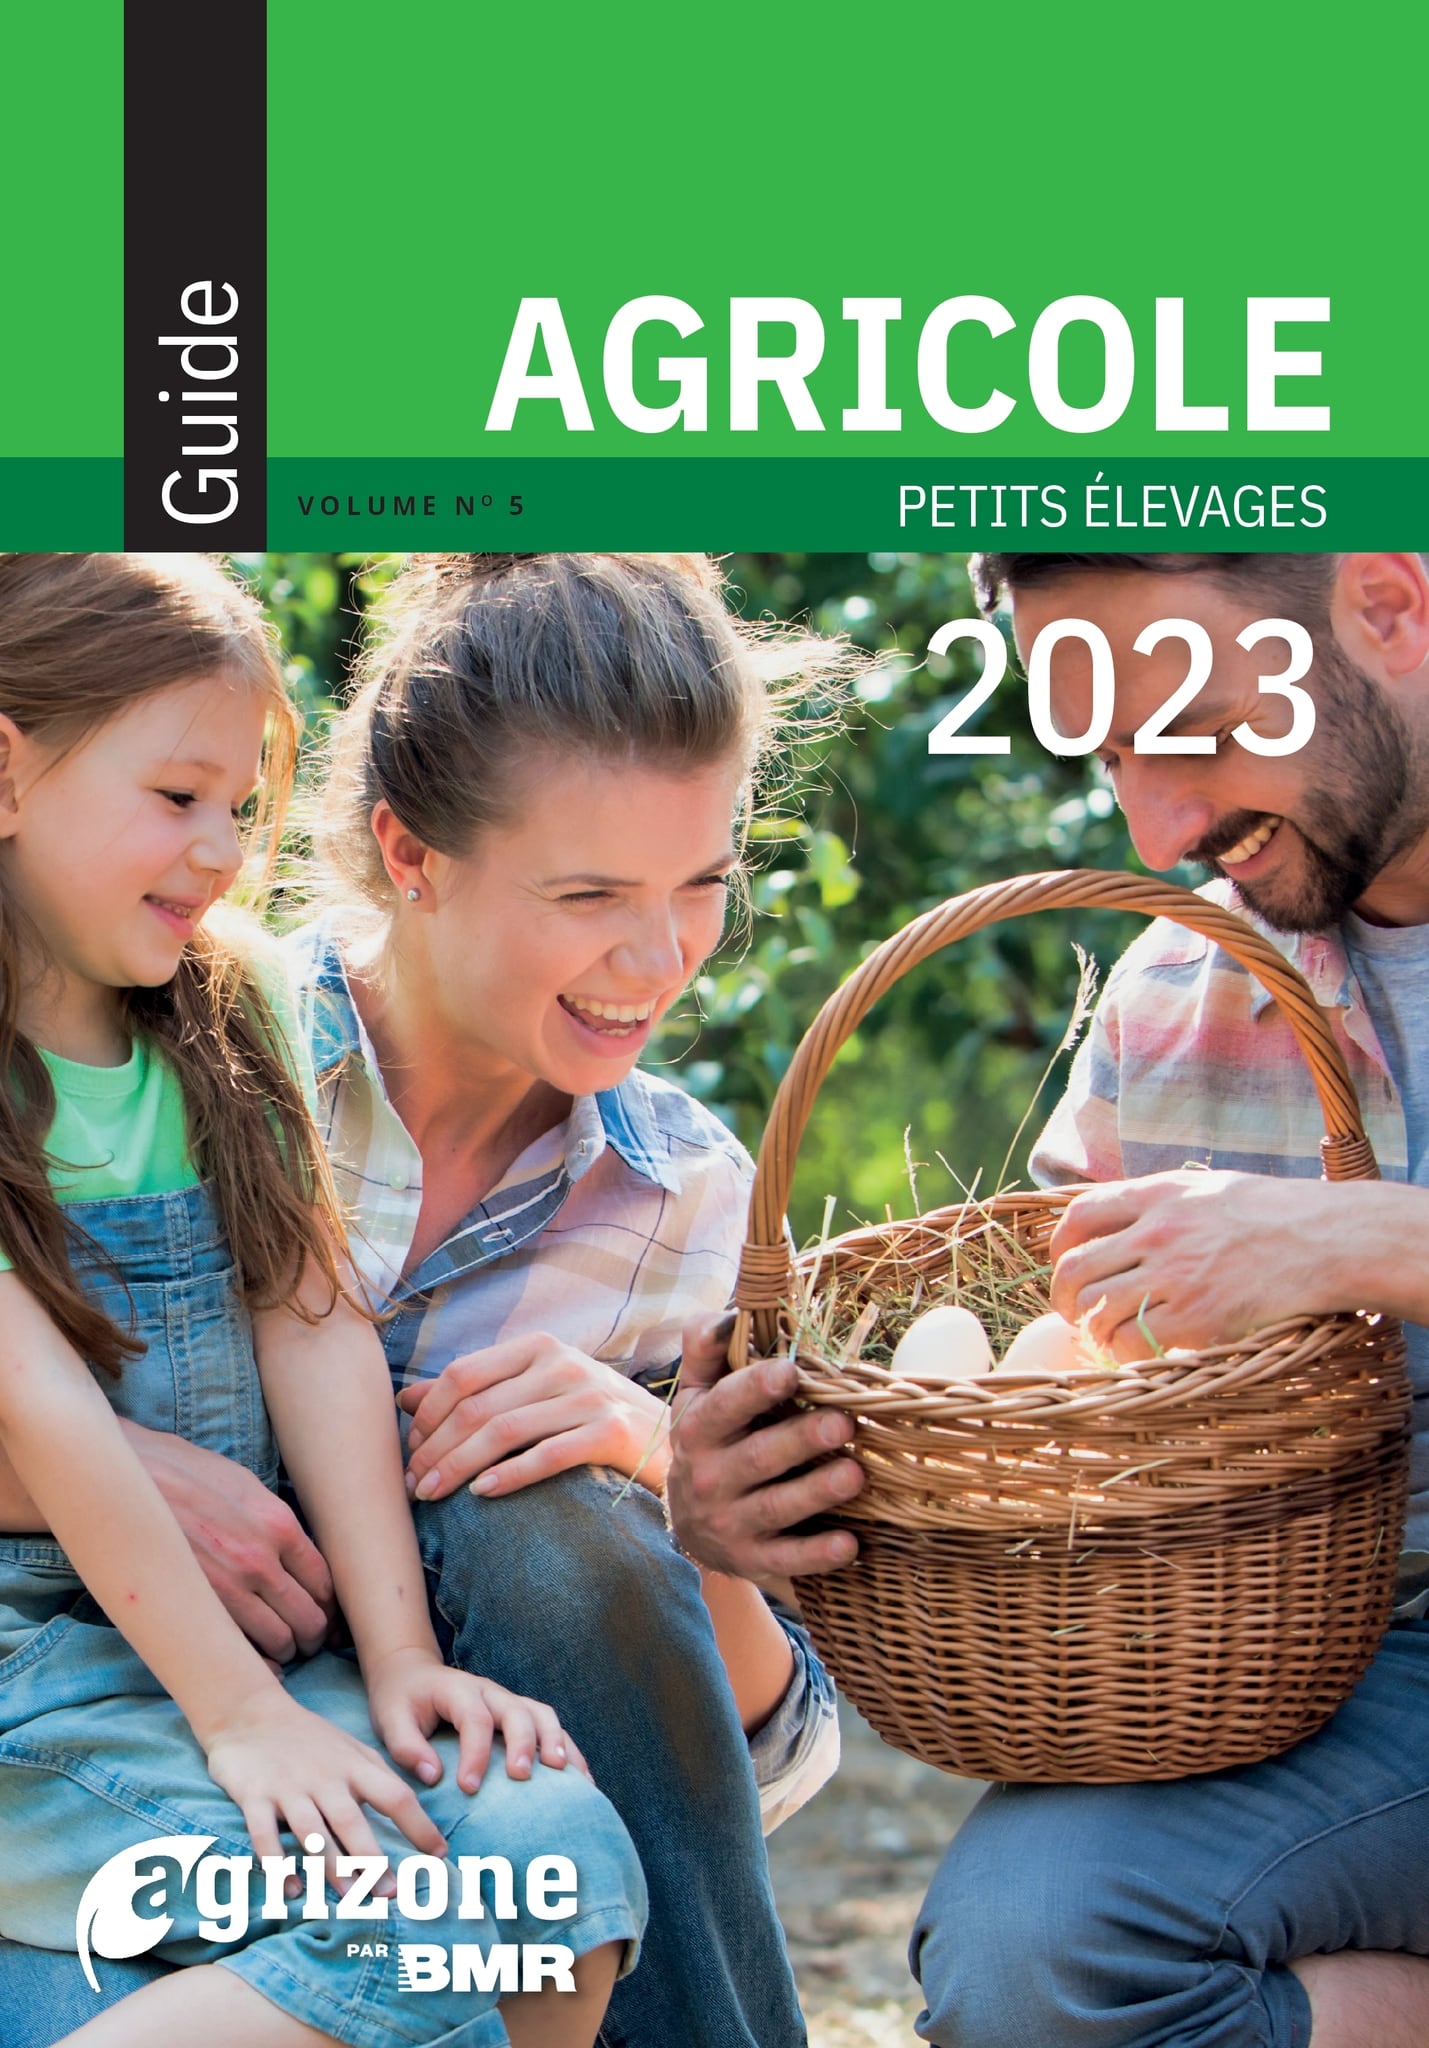 Circulaire BMR - Agricole 2023 - Page 1